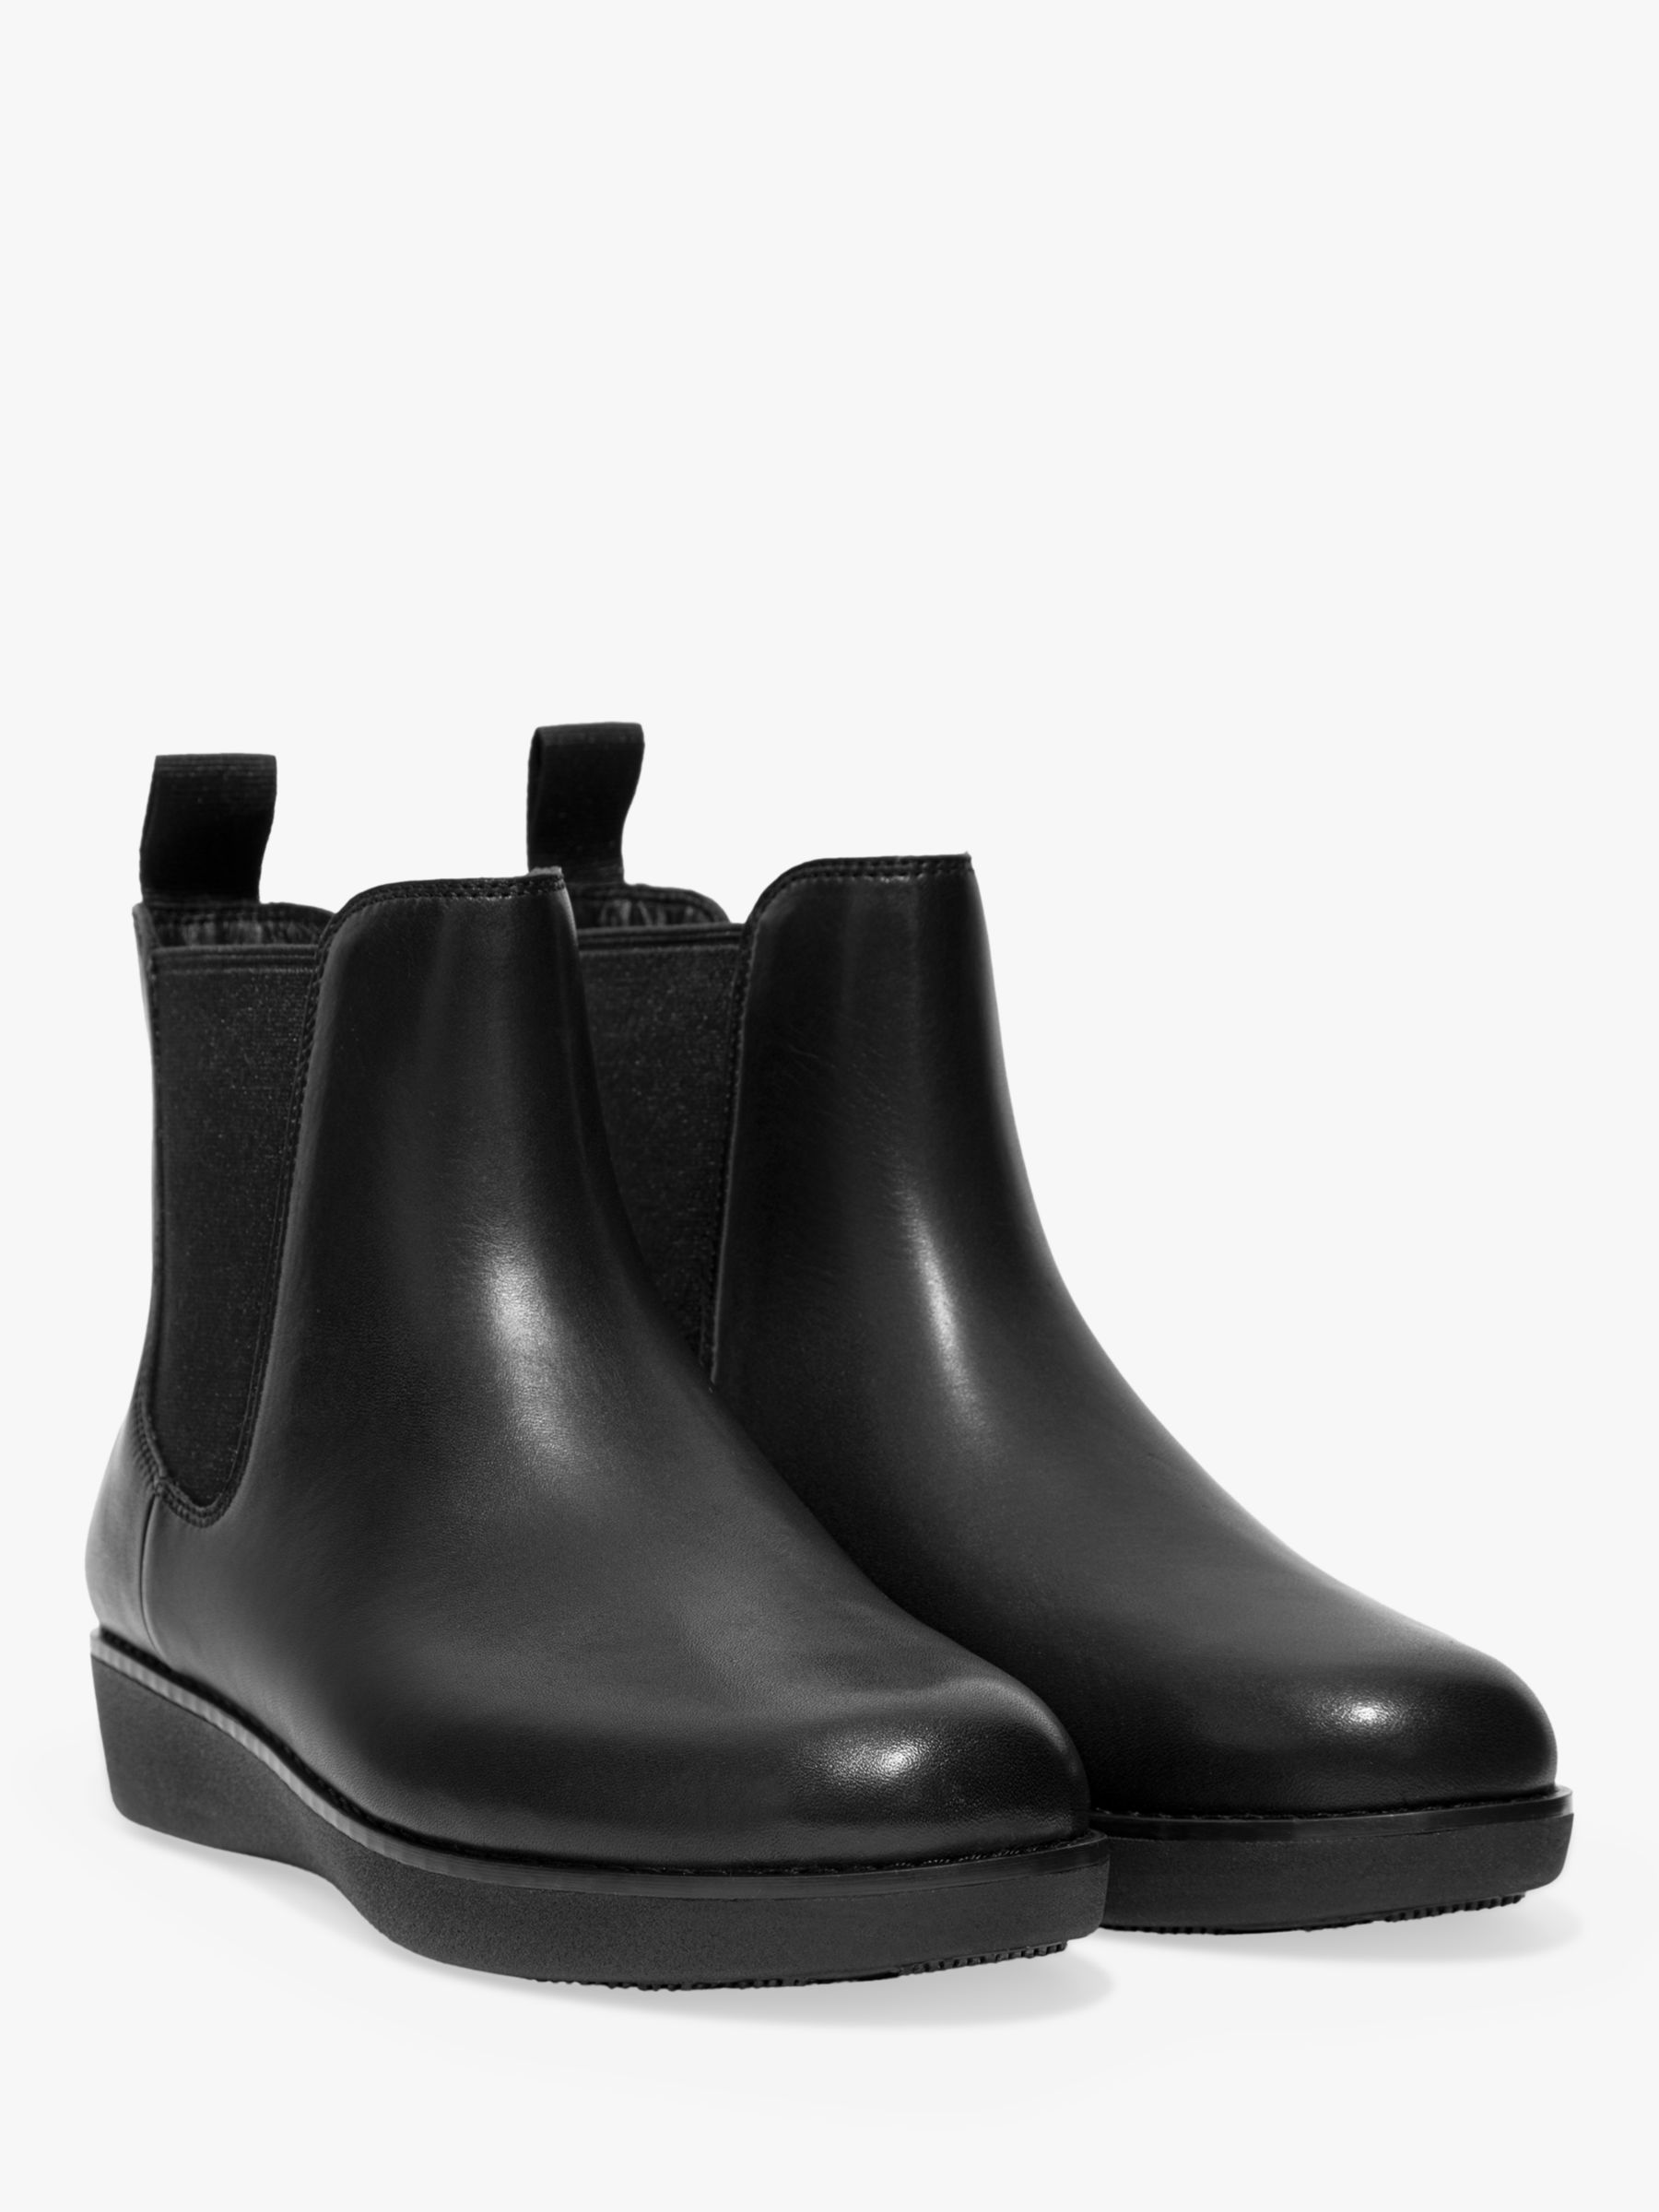 FitFlop Sumi Leather Chelsea Boots, All Black at John Lewis & Partners